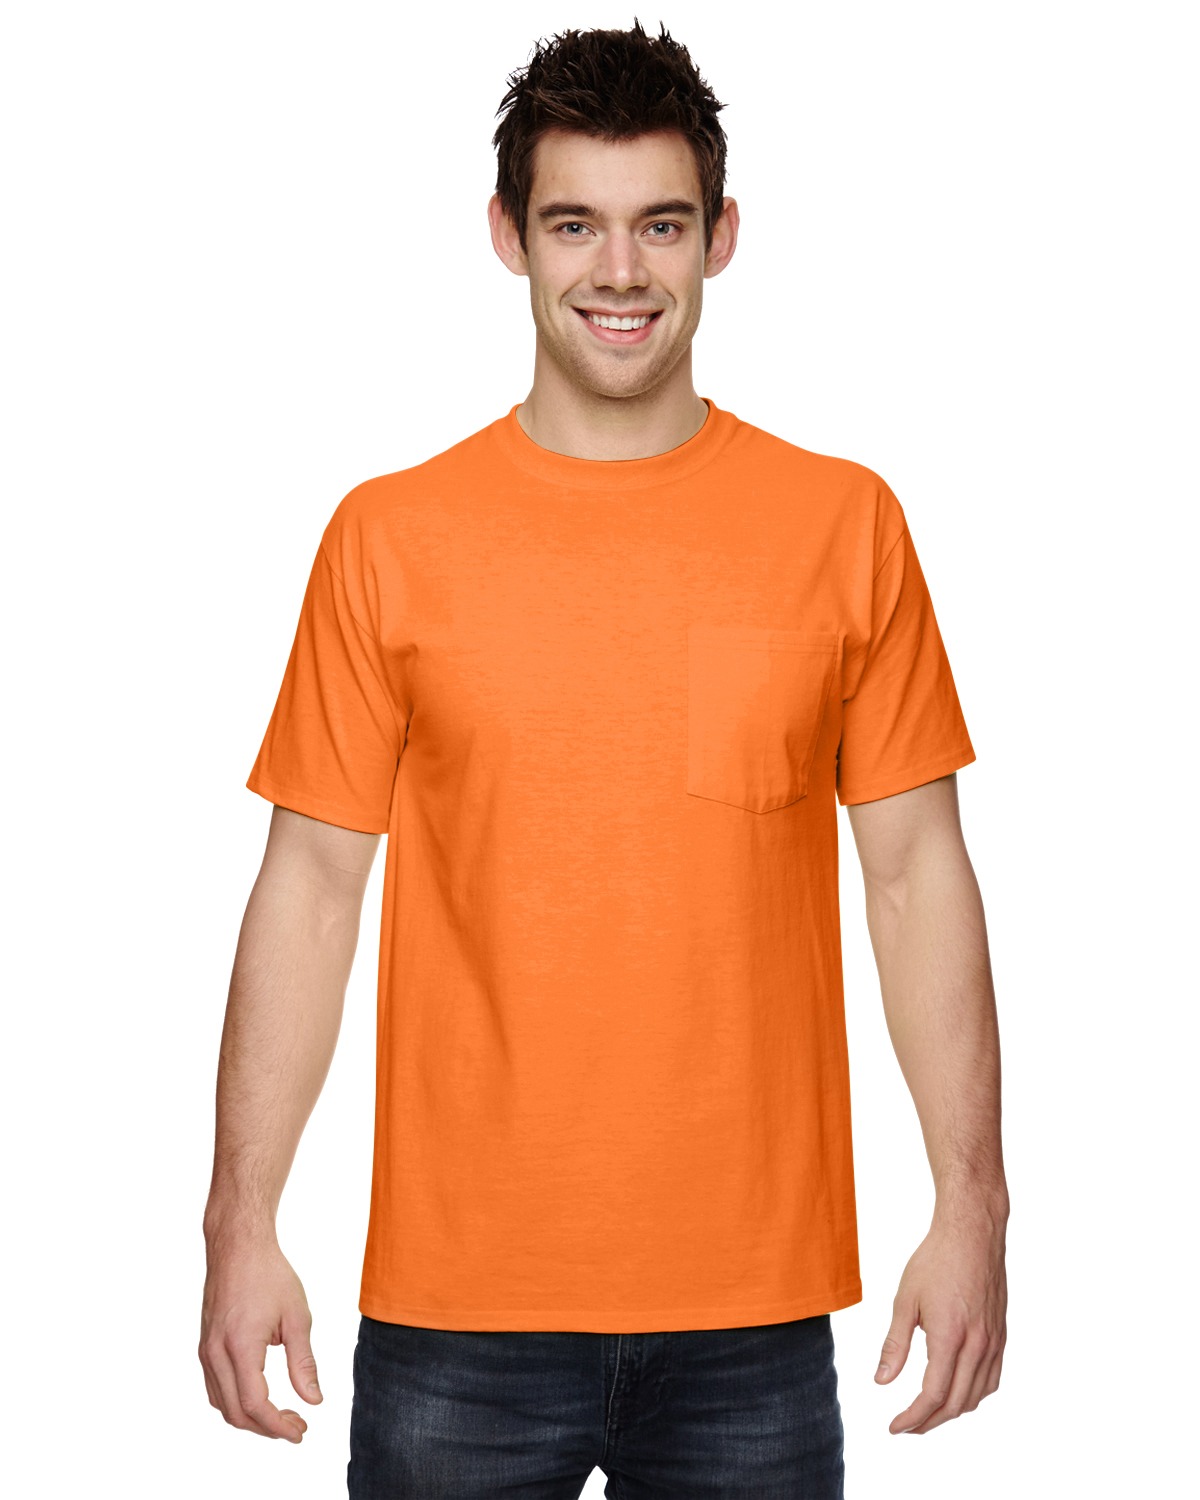 Fruit of the Loom - The Fruit of the Loom Adult 5 oz HD Cotton Pocket T ...